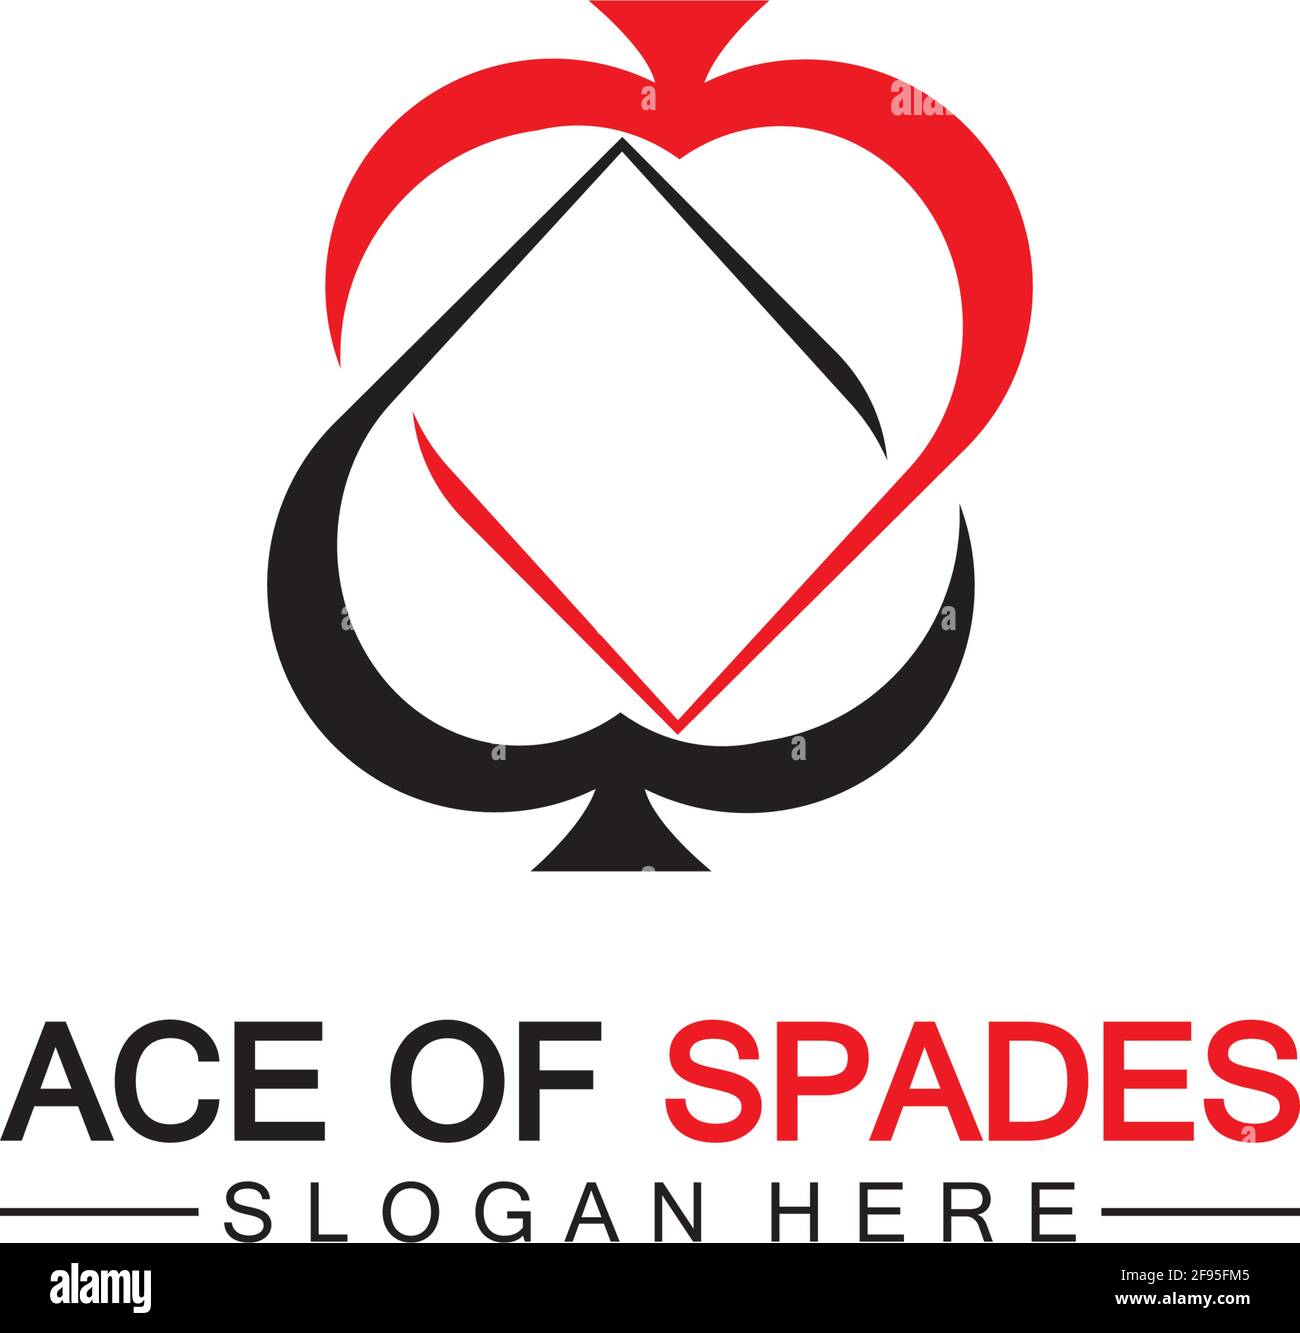 Ace of Spades icon logo design. Flat related icon for web and